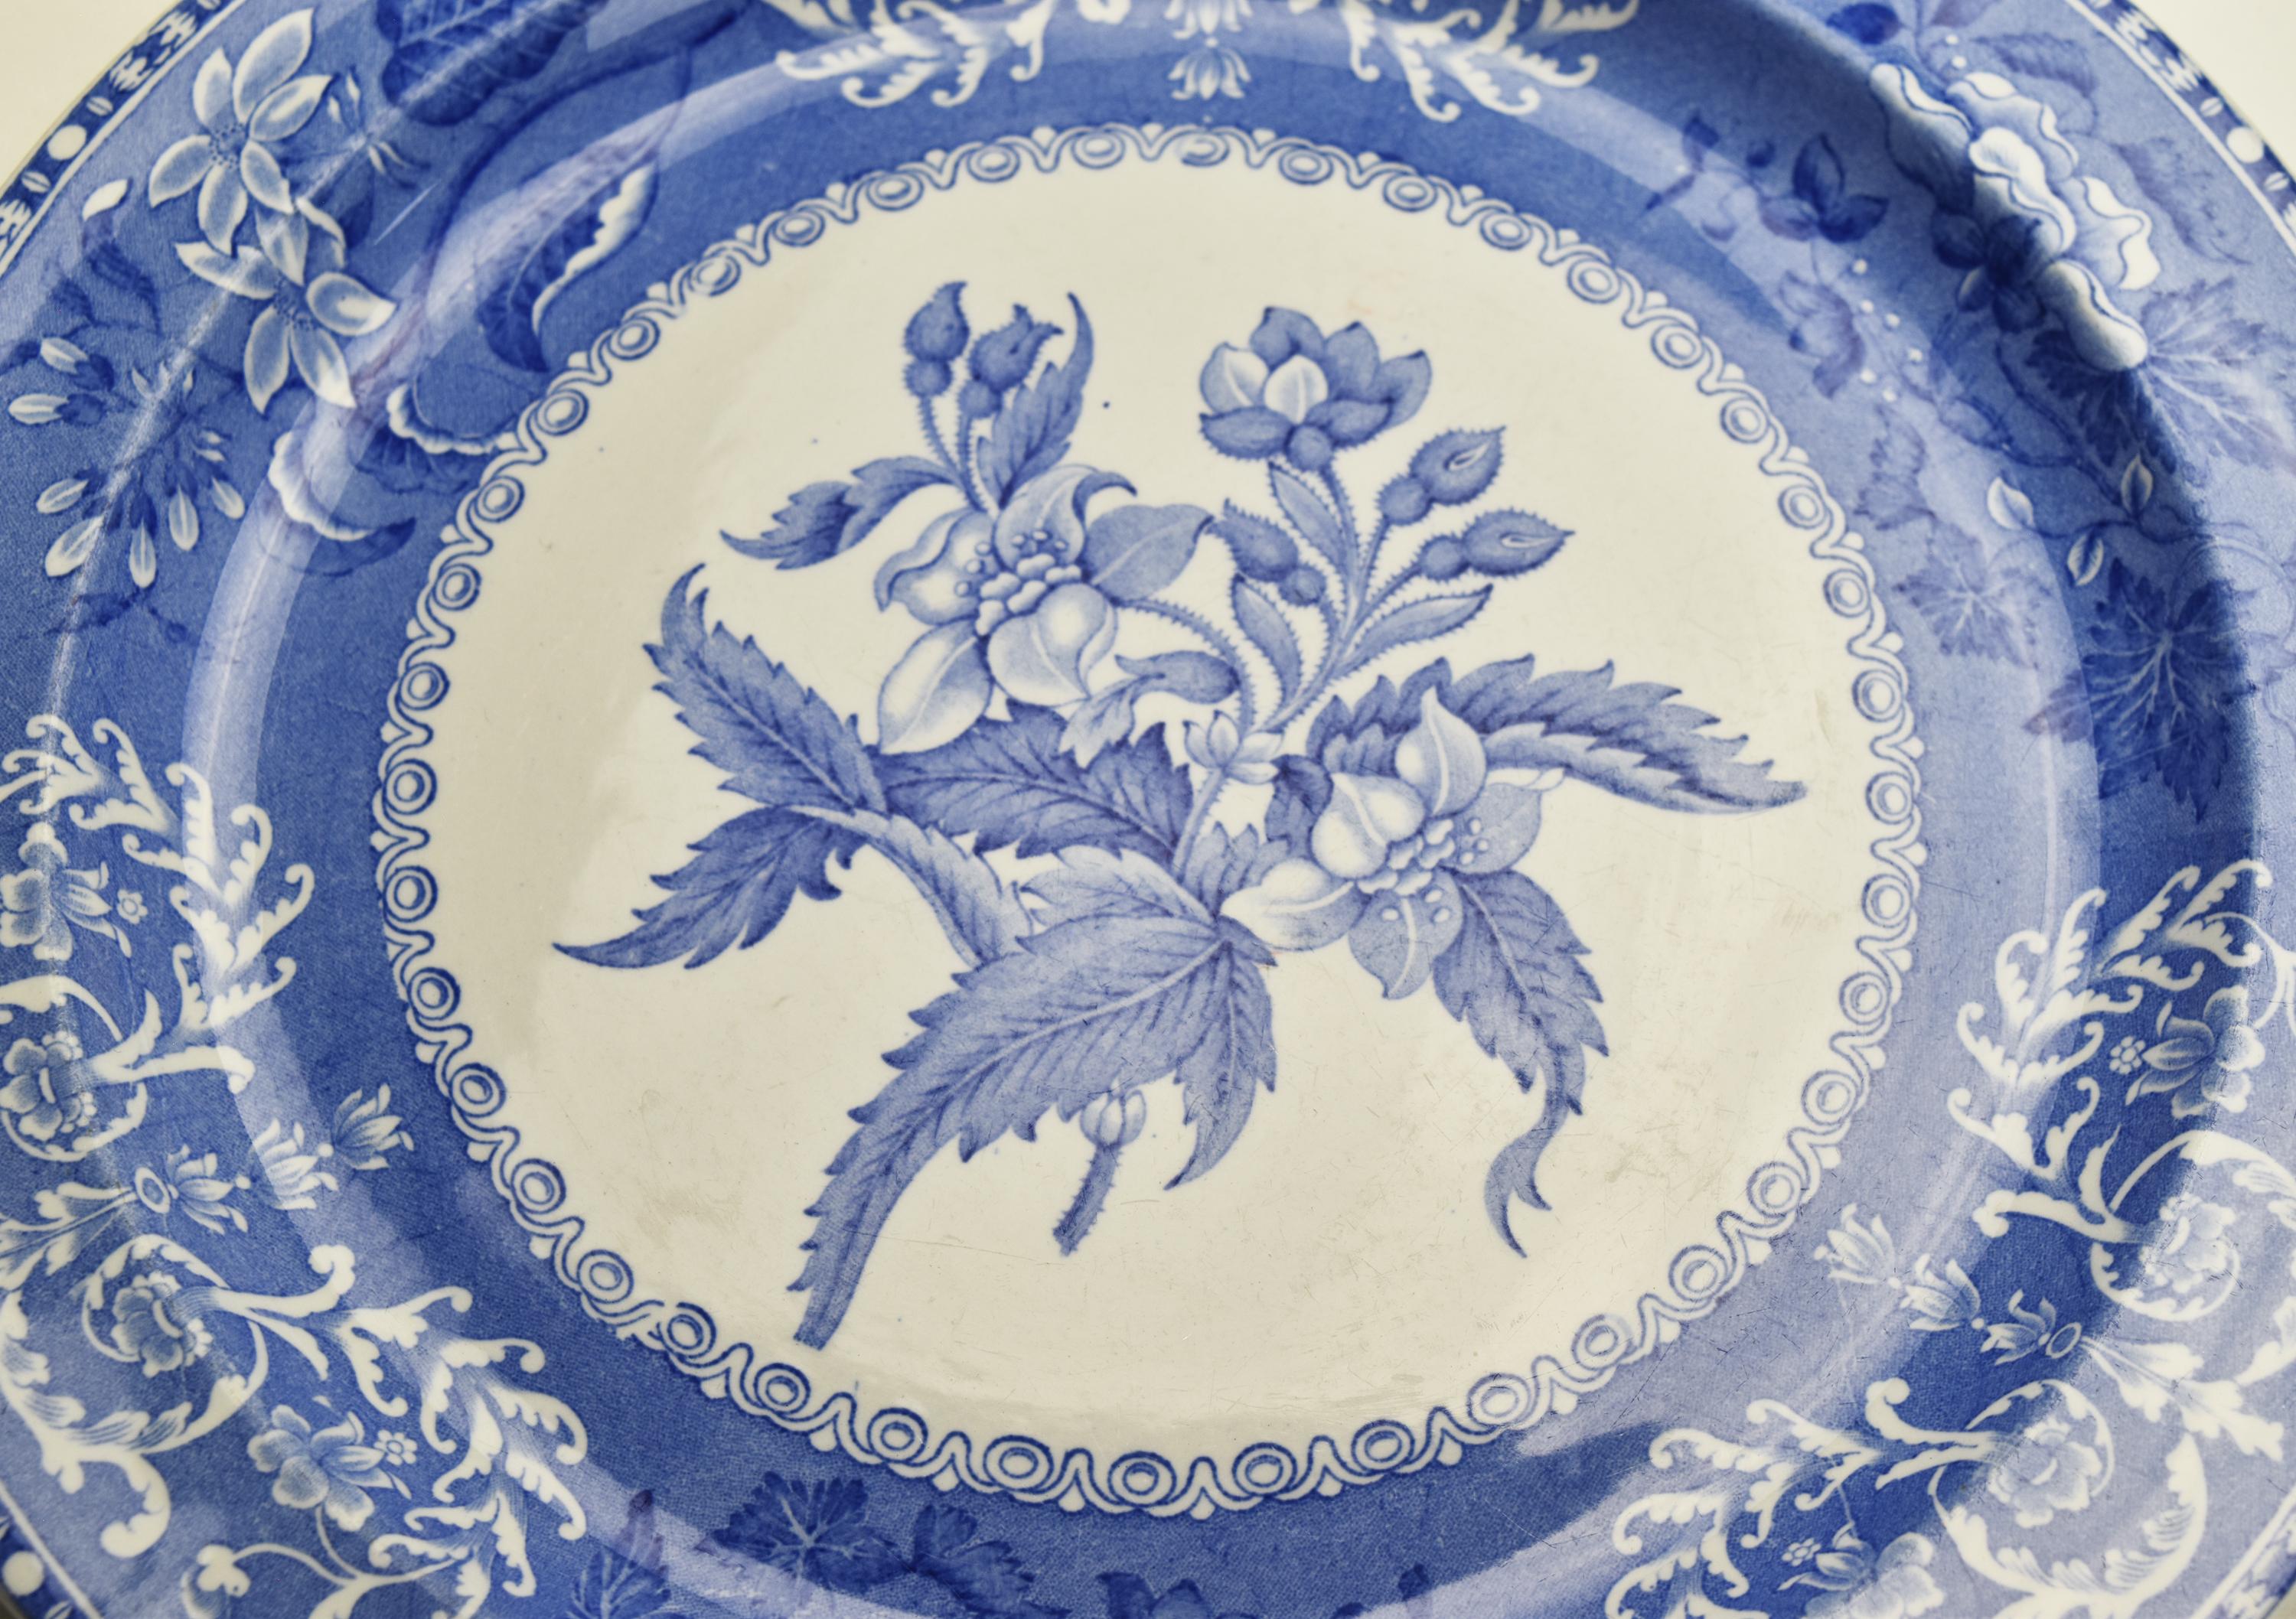 Late 19th Century Rare Large Round Antique Spode Serving Platter Dish Plate Camilla Transferware For Sale